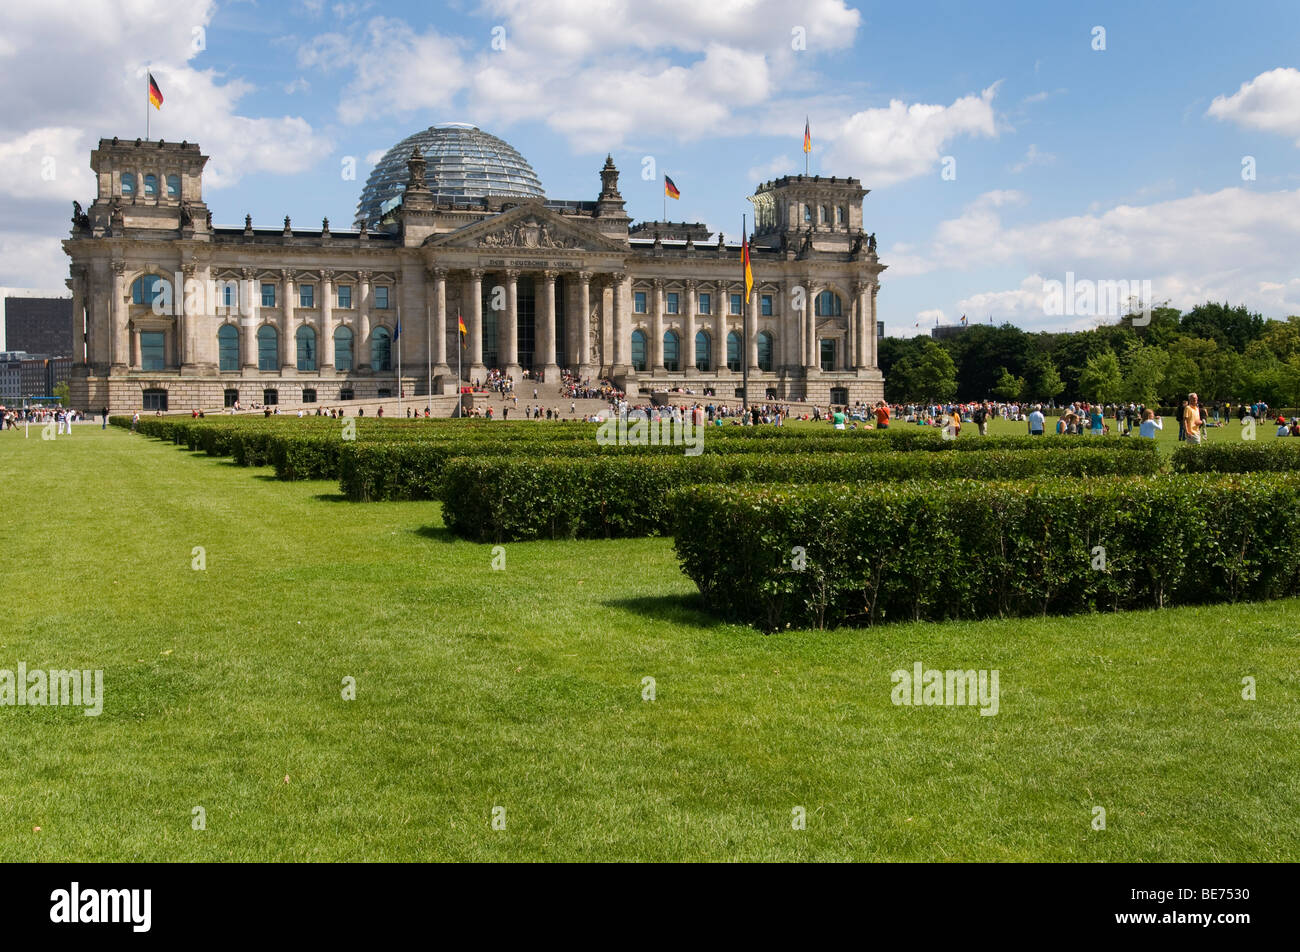 People relaxing on the lawn in front of  the German Parliament building, the Reichstag on a summer's day. Stock Photo